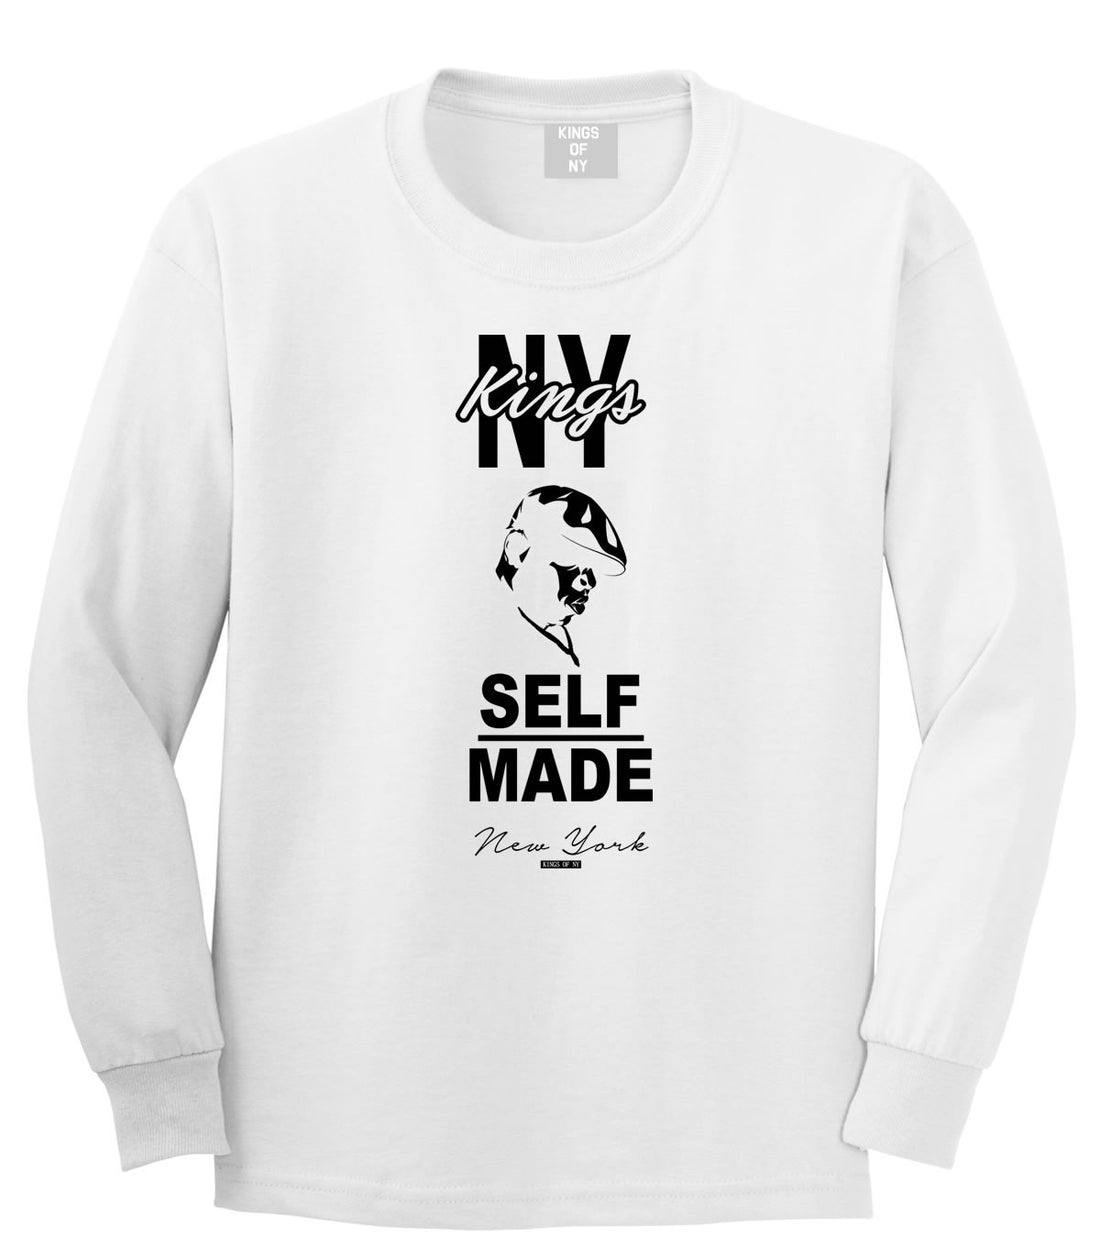 NY Kings Self Made Biggie Long Sleeve T-Shirt in White By Kings Of NY